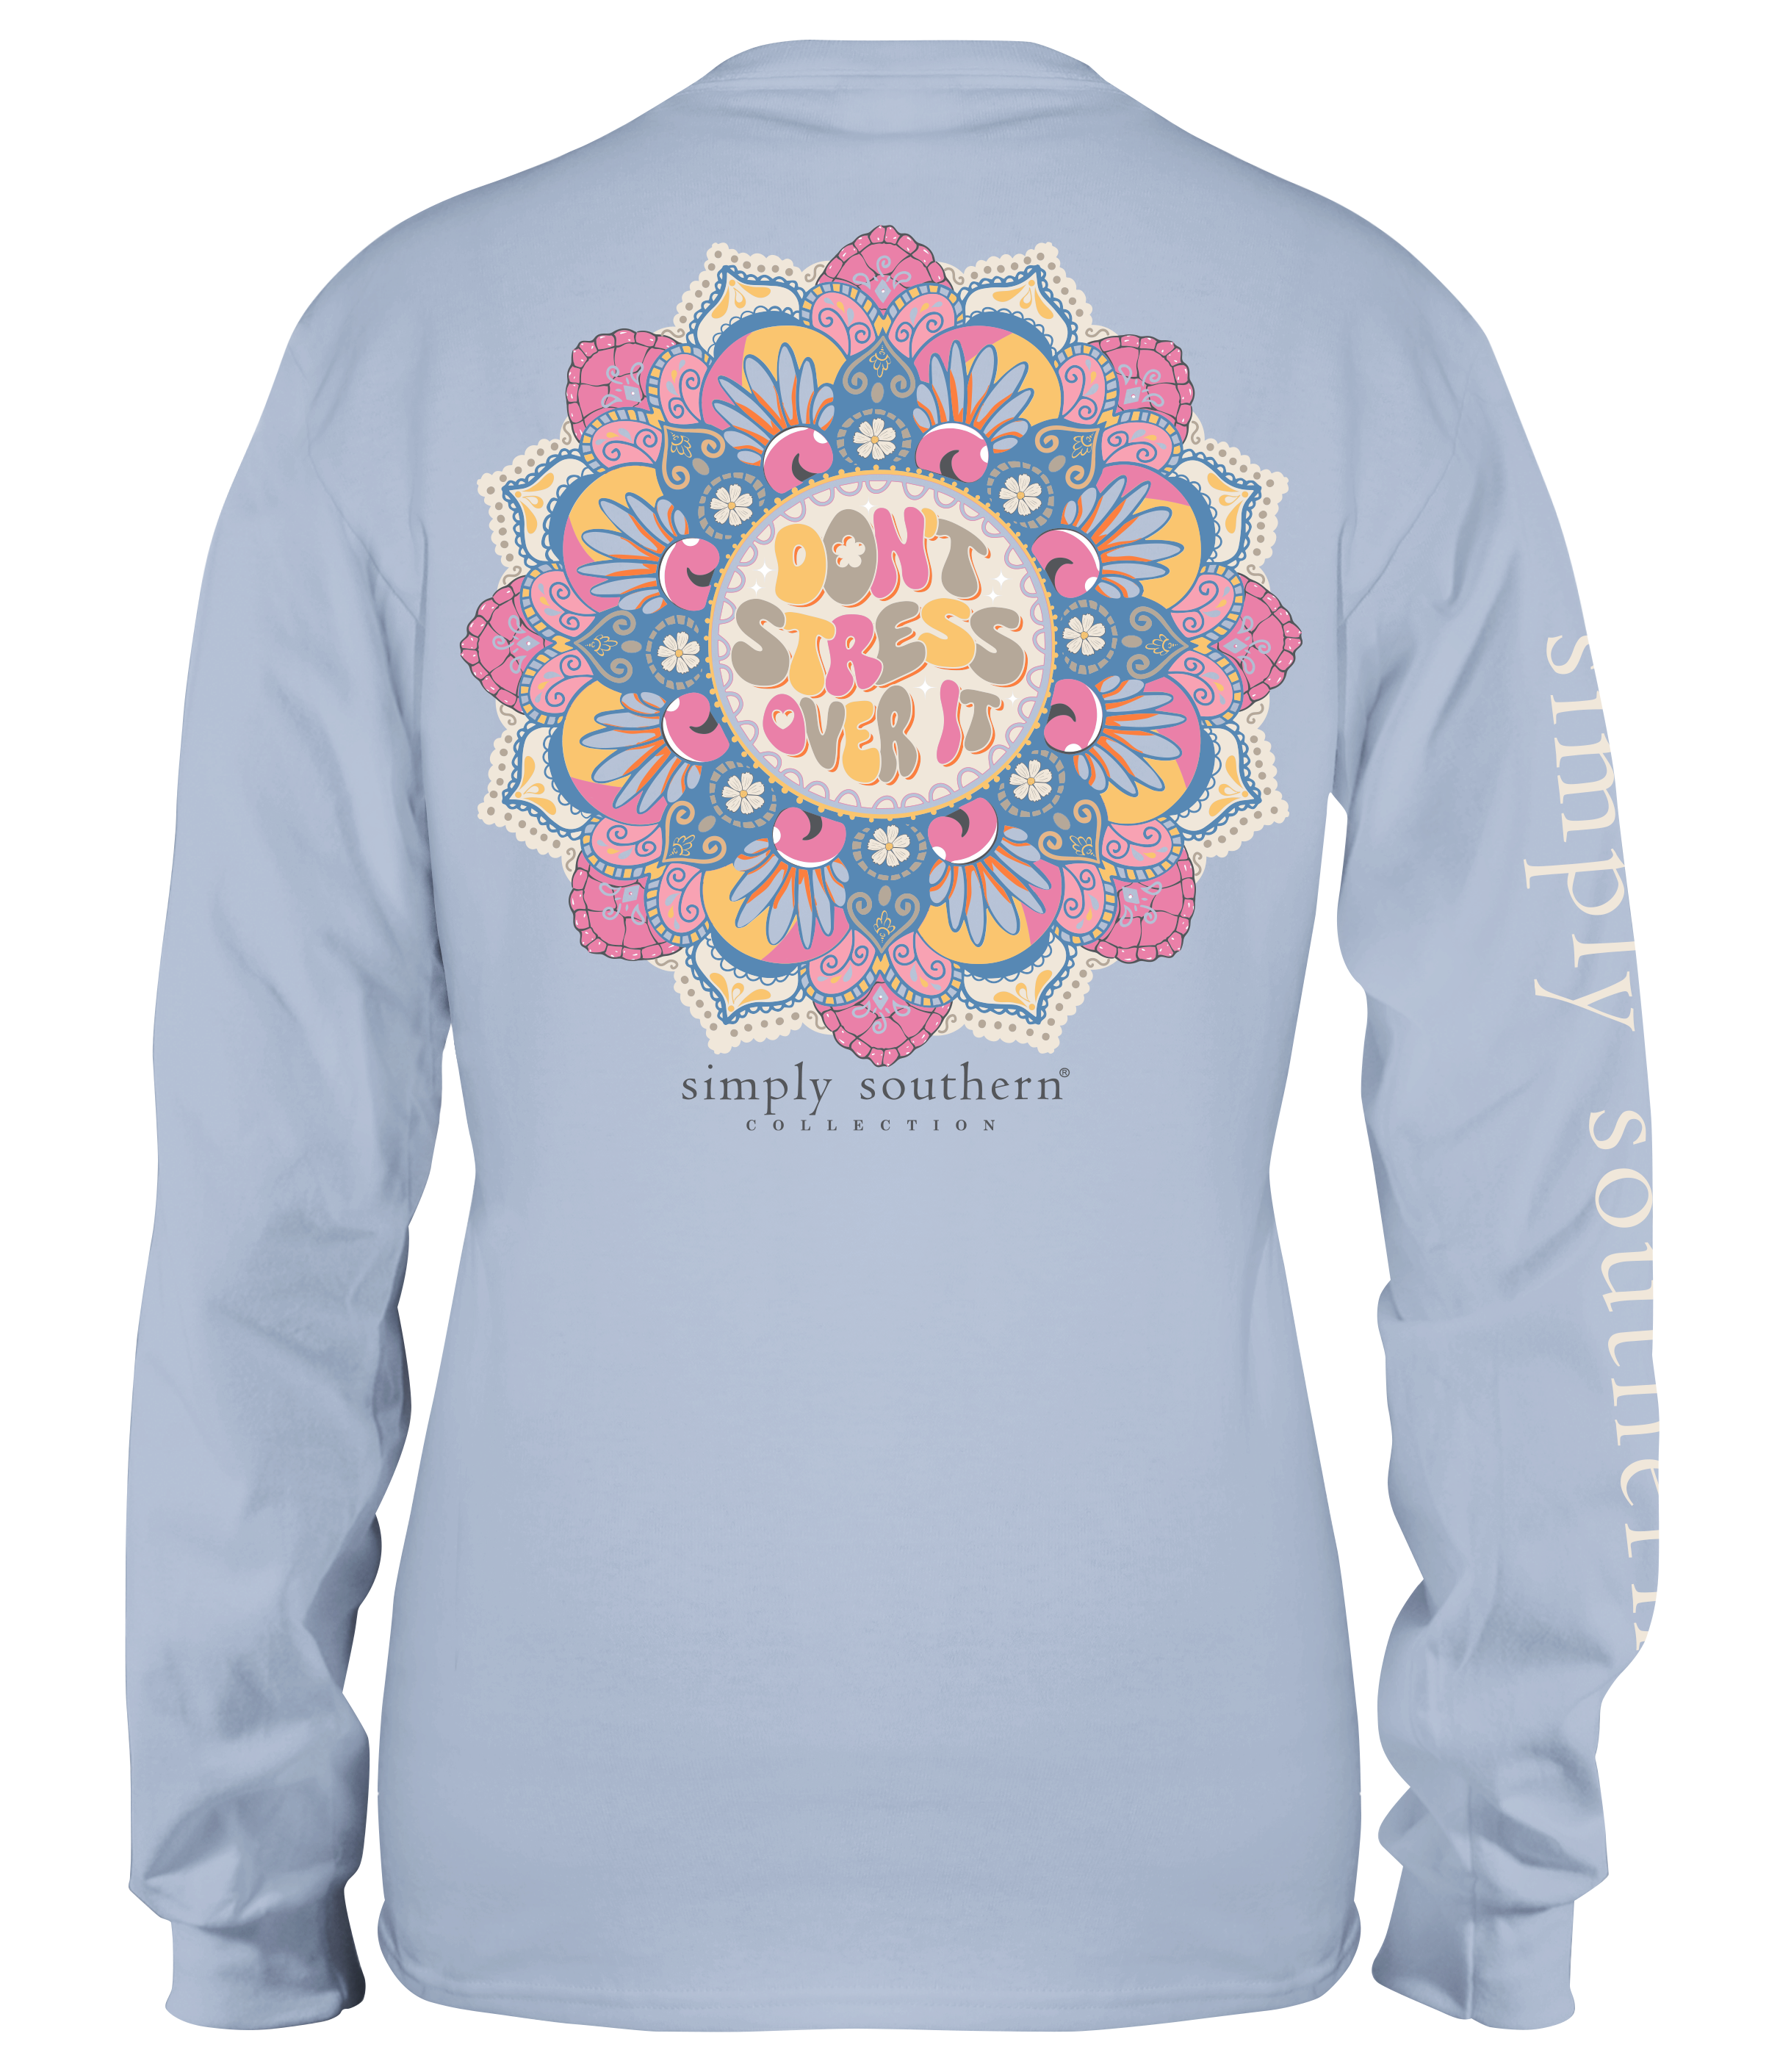 'Don't Stress Over It' Long Sleeve Tee by Simply Southern